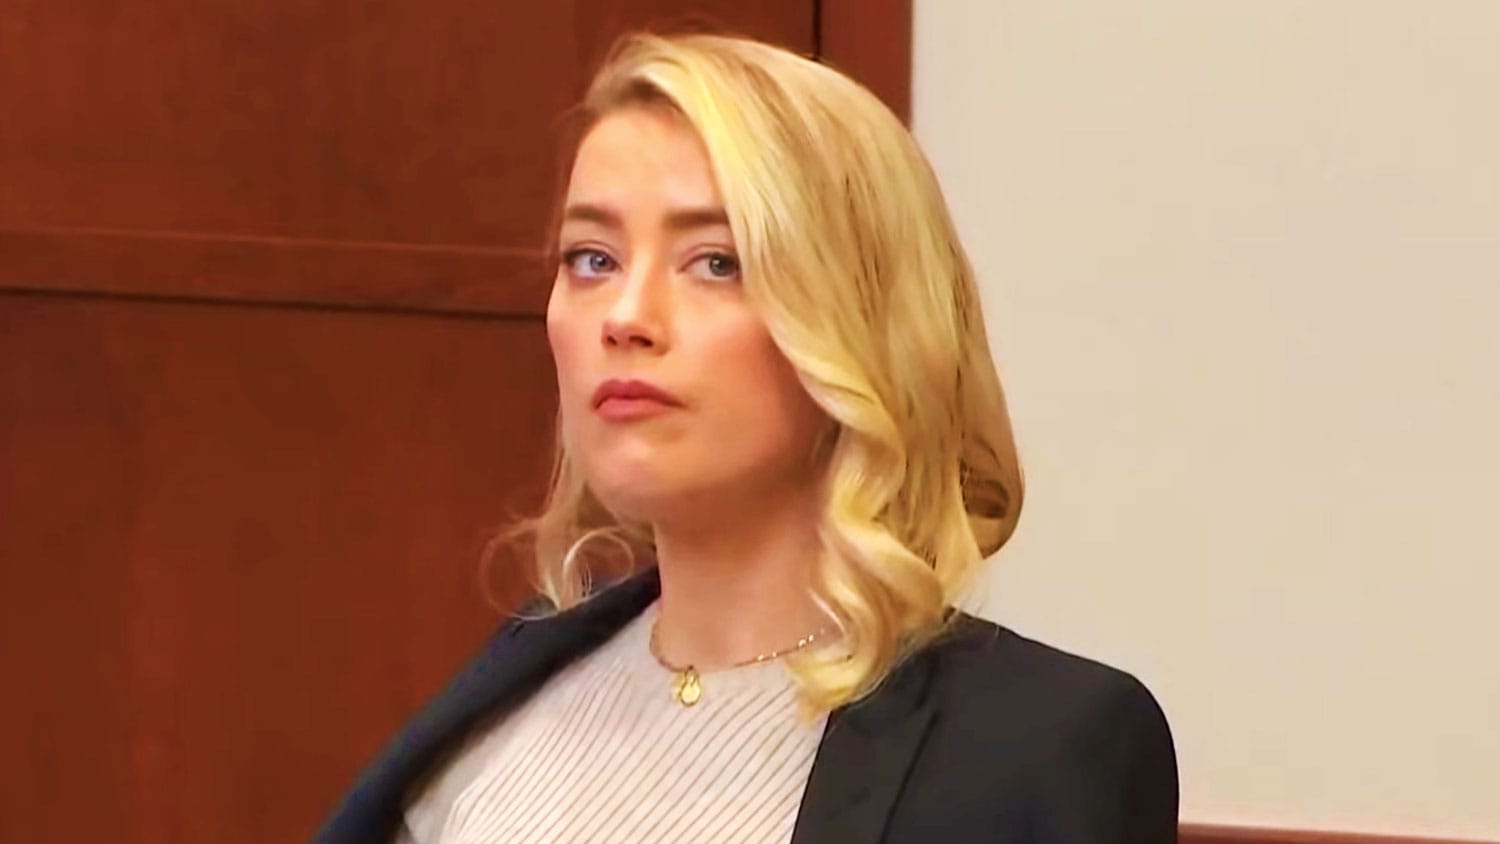 Amber-Heard-Aggressively-Booed-On-Her-Way-Into-Court